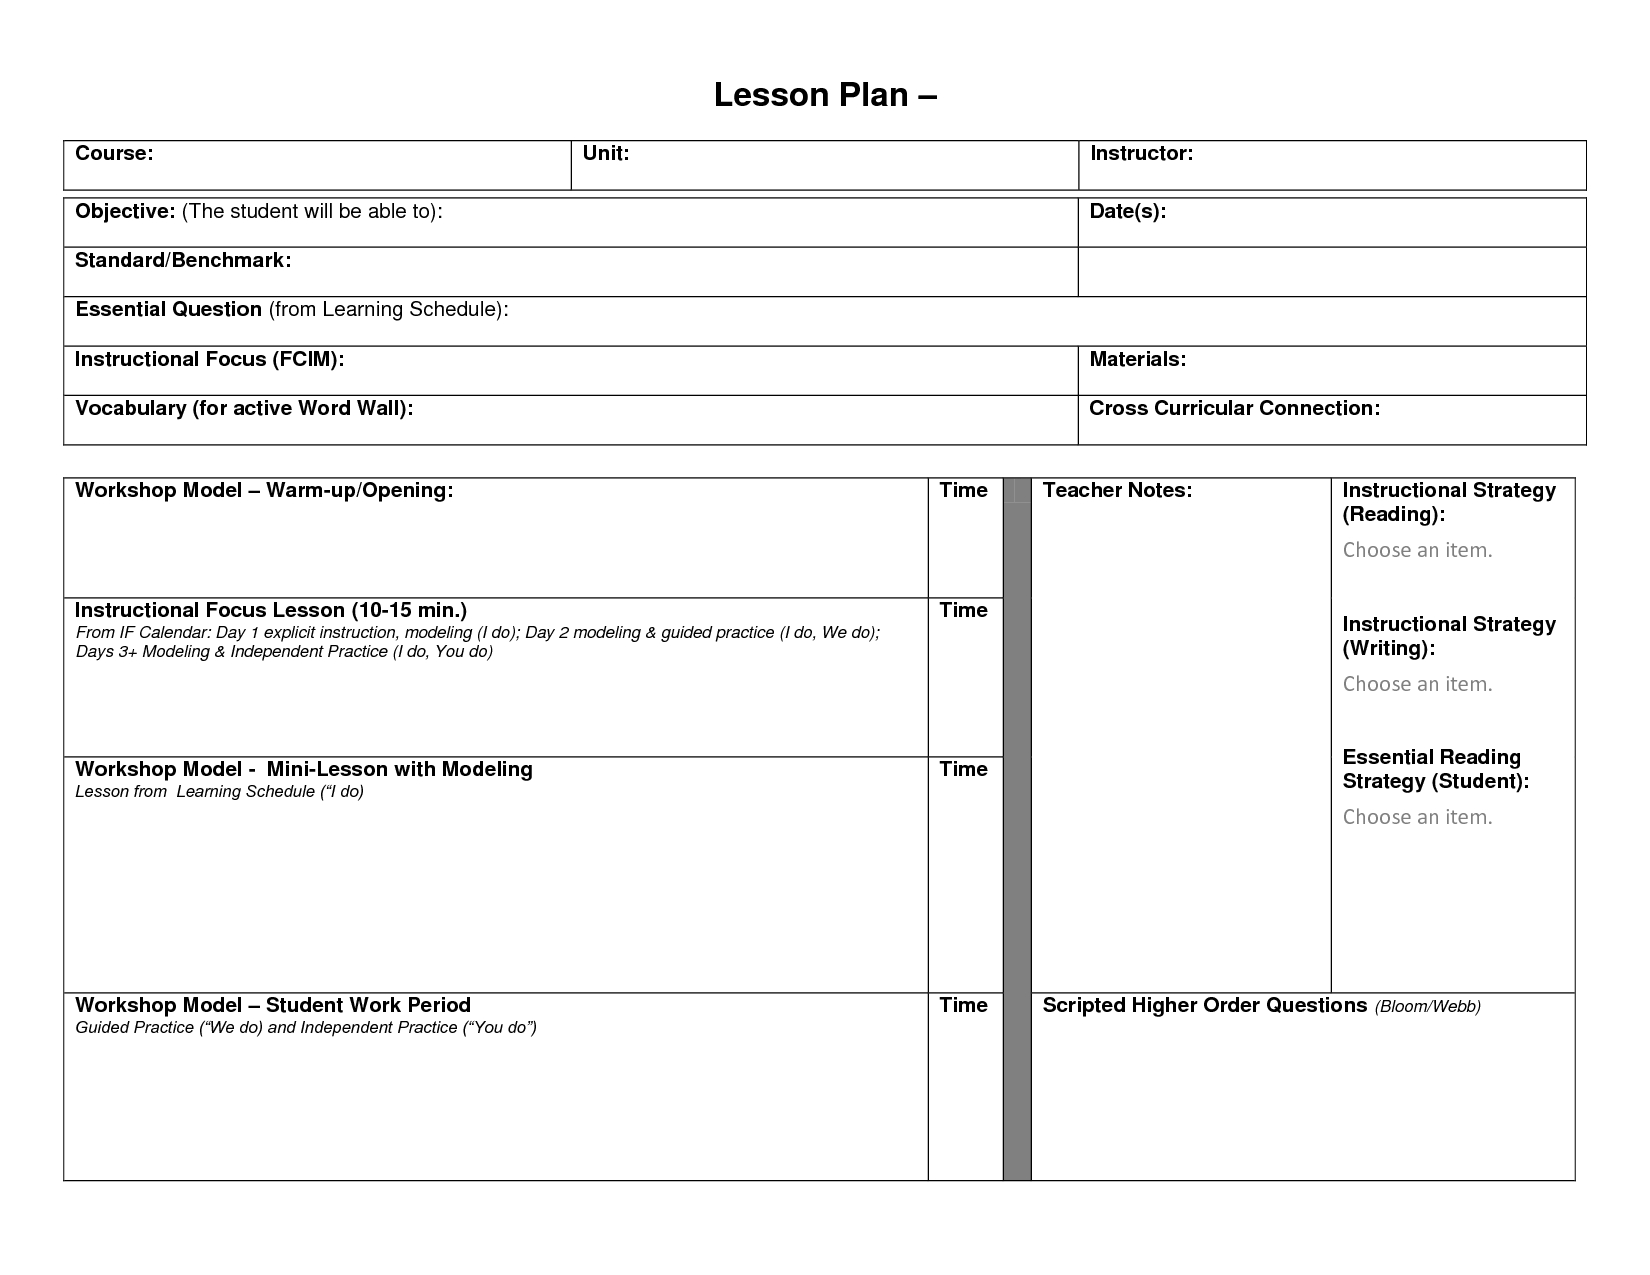 Blank Lesson Plan Format Template | Blank Lesson Template - Doc with regard to One Year Calendar Lesson Plan Templates